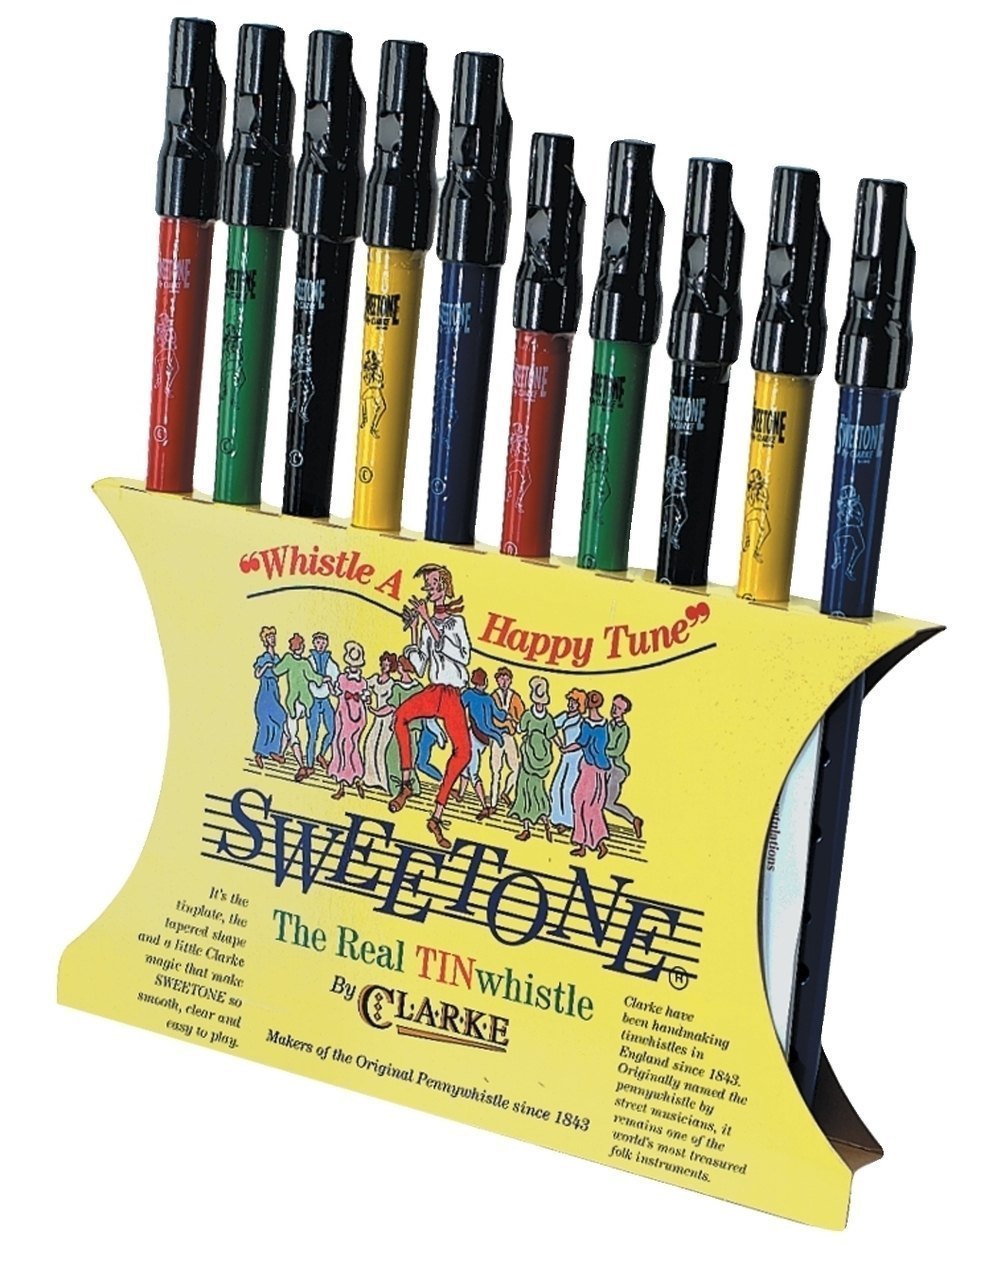 Clarke Sweetone Whistle A Happy Tune - RÉ / D -  - Variation 1